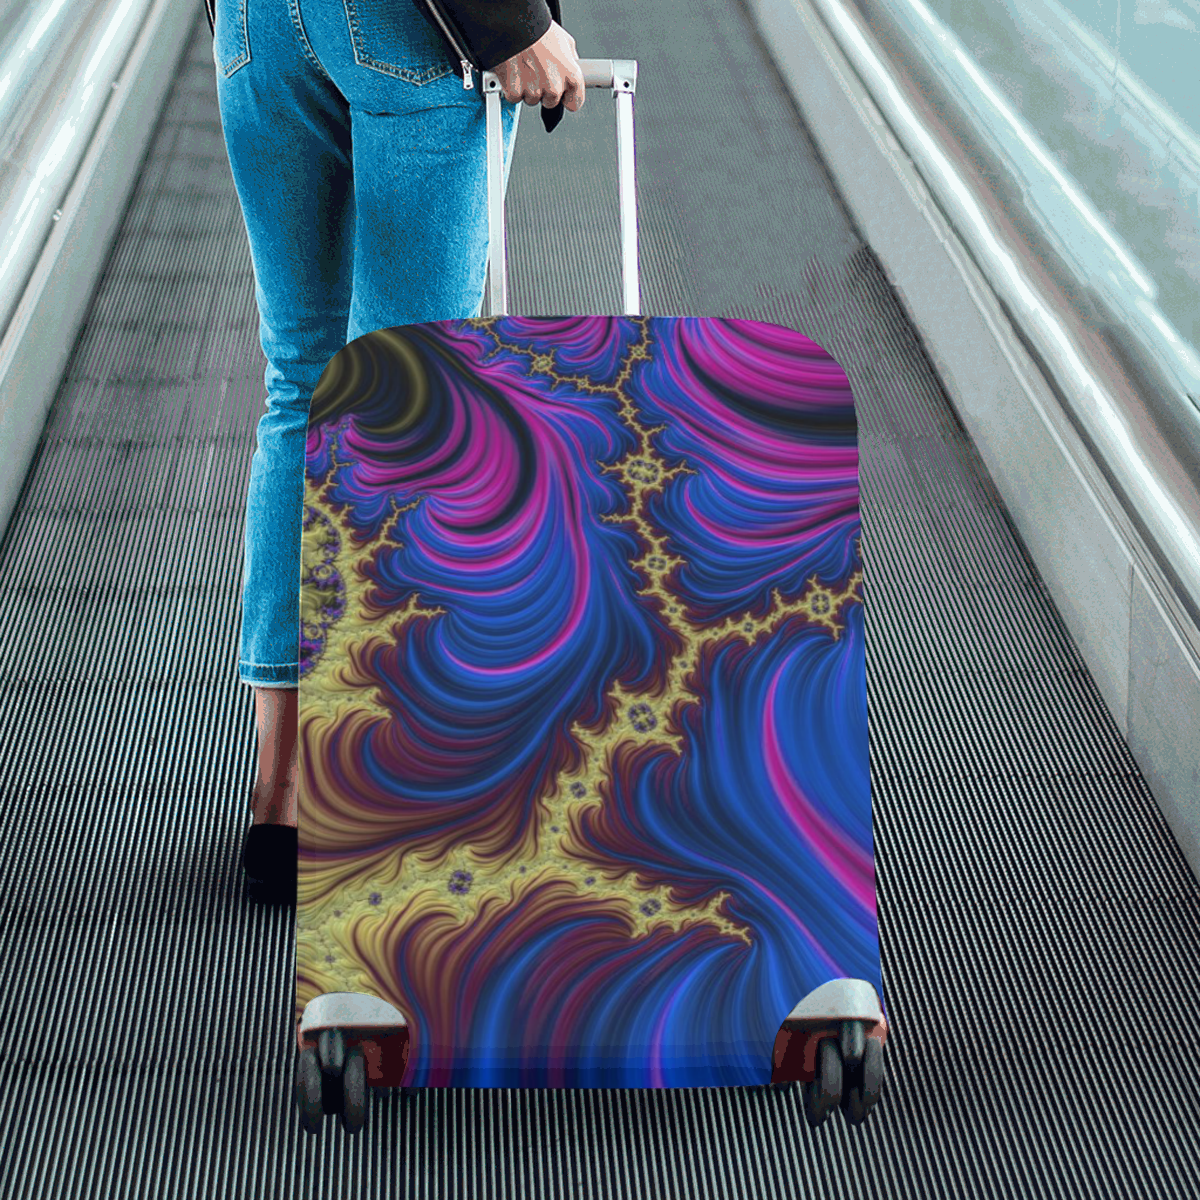 gorgeous Fractal 177 C by JamColors Luggage Cover/Large 26"-28"